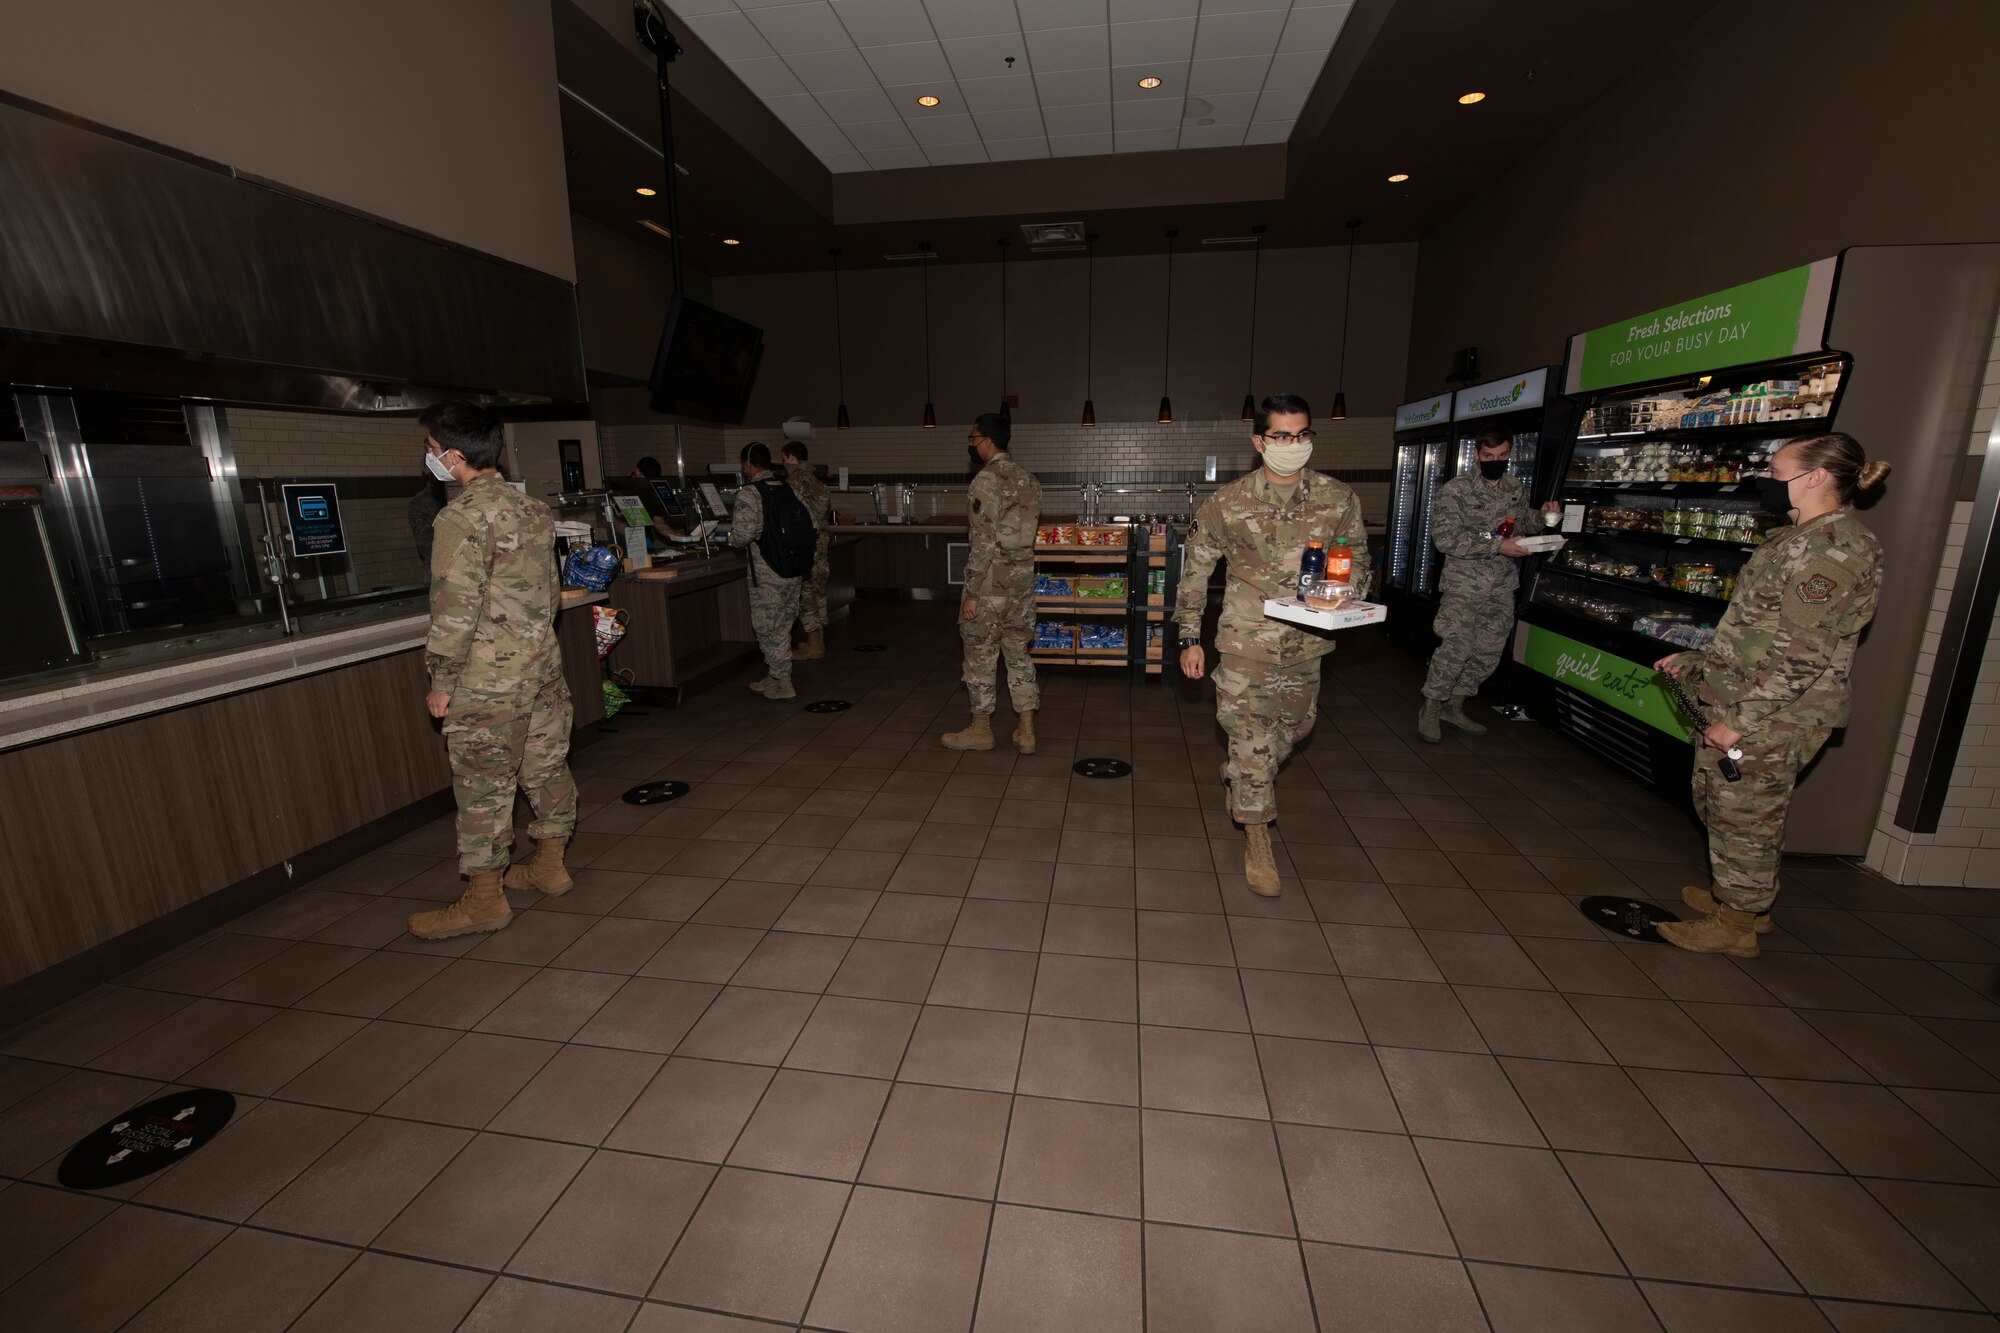 U.S. Airmen maintain physical distancing during the lunch service inside the Monarch Dining Facility April 24, 2020, at Travis Air Force Base, California. The Monarch is offering to-go meals to service members only due to the coronavirus pandemic. While inside the Monarch, all patrons must maintain at least six feet of separation from one another. (U.S. Air Force photo by Tech. Sgt. James Hodgman)